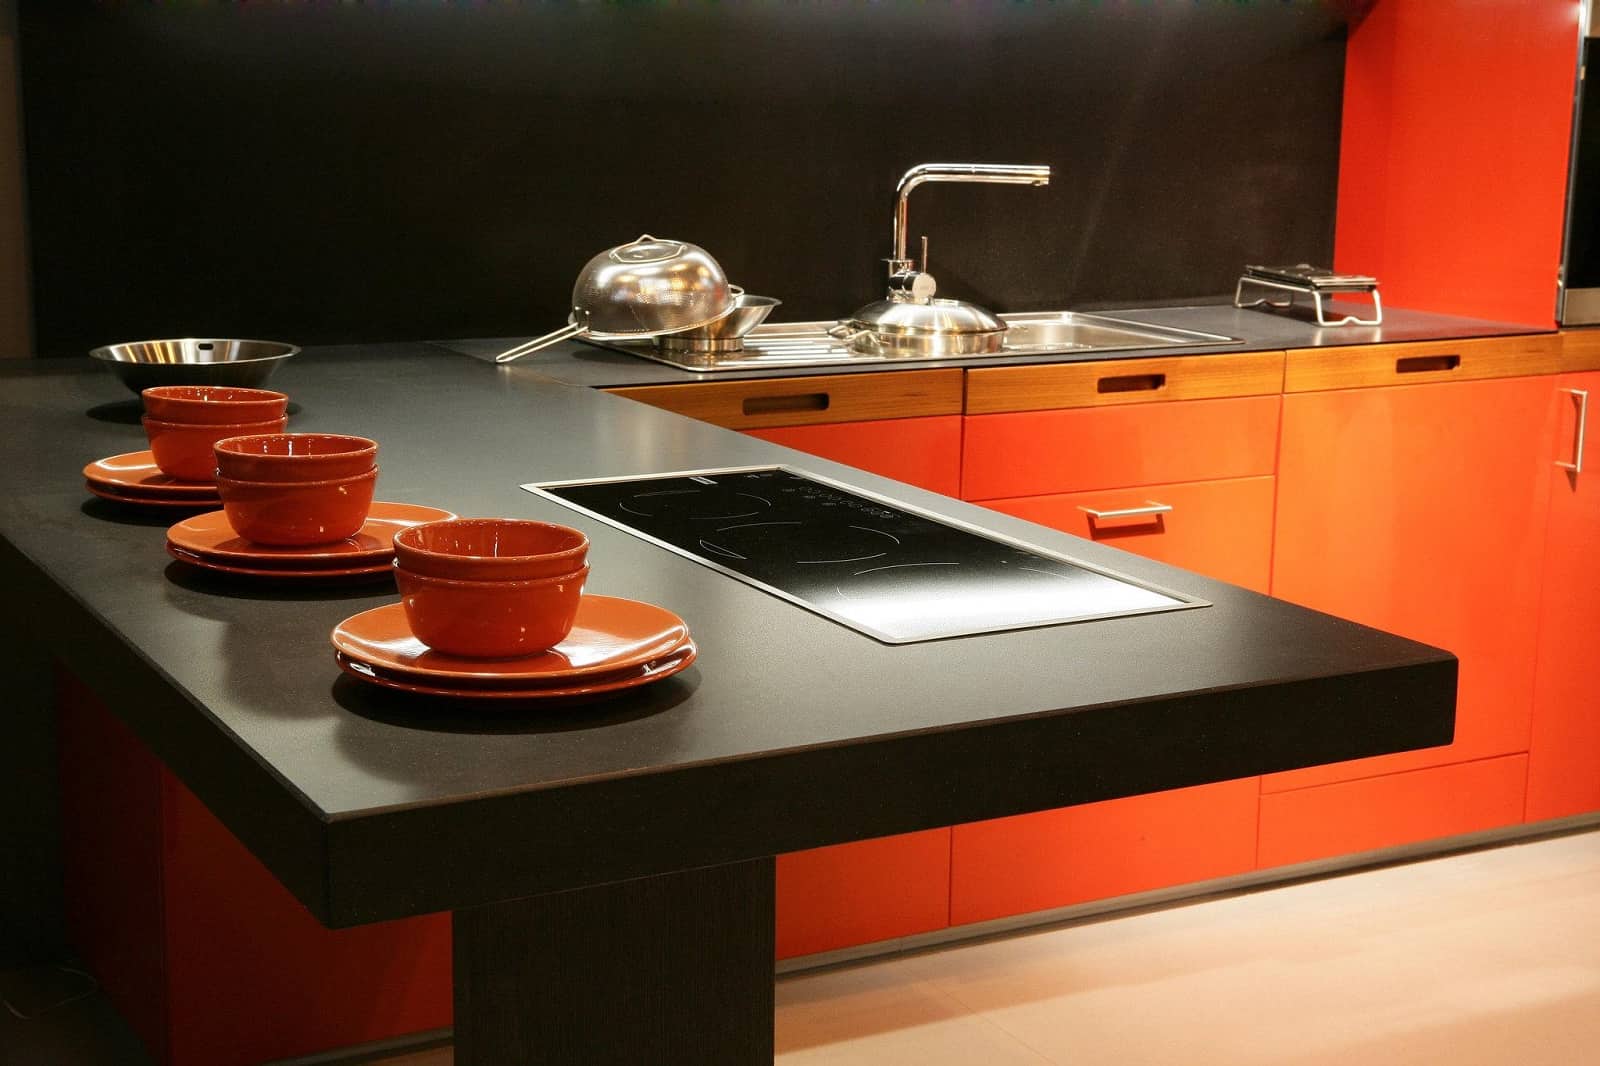 Silestone: The Up and Coming Worktop Material. Black and orange ultramodern kitchen theme in exquisite brutal style